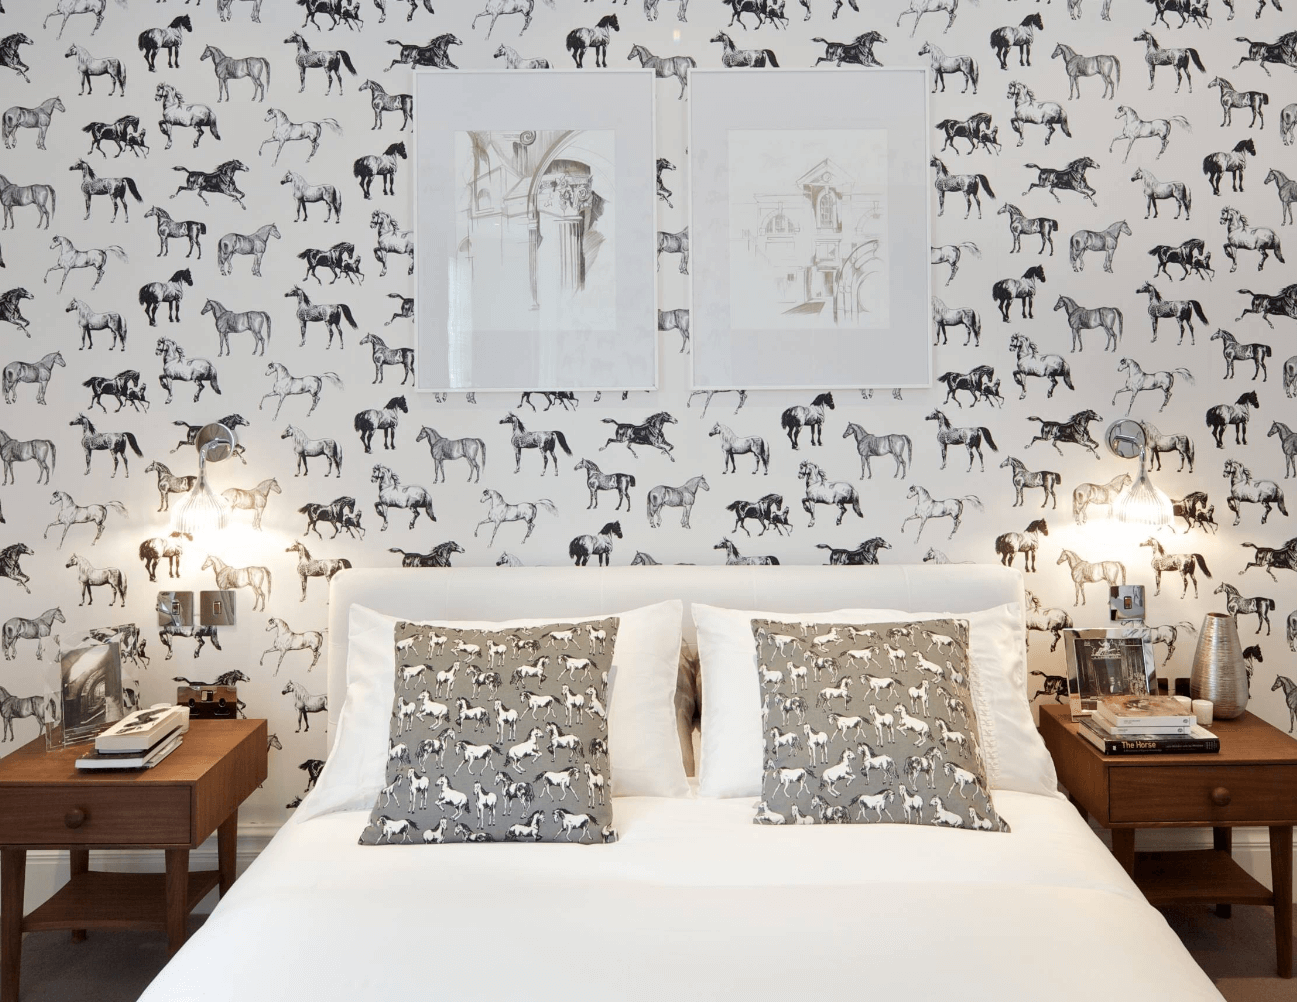 9 Wallpaper Ideas to Jazz Up a Room